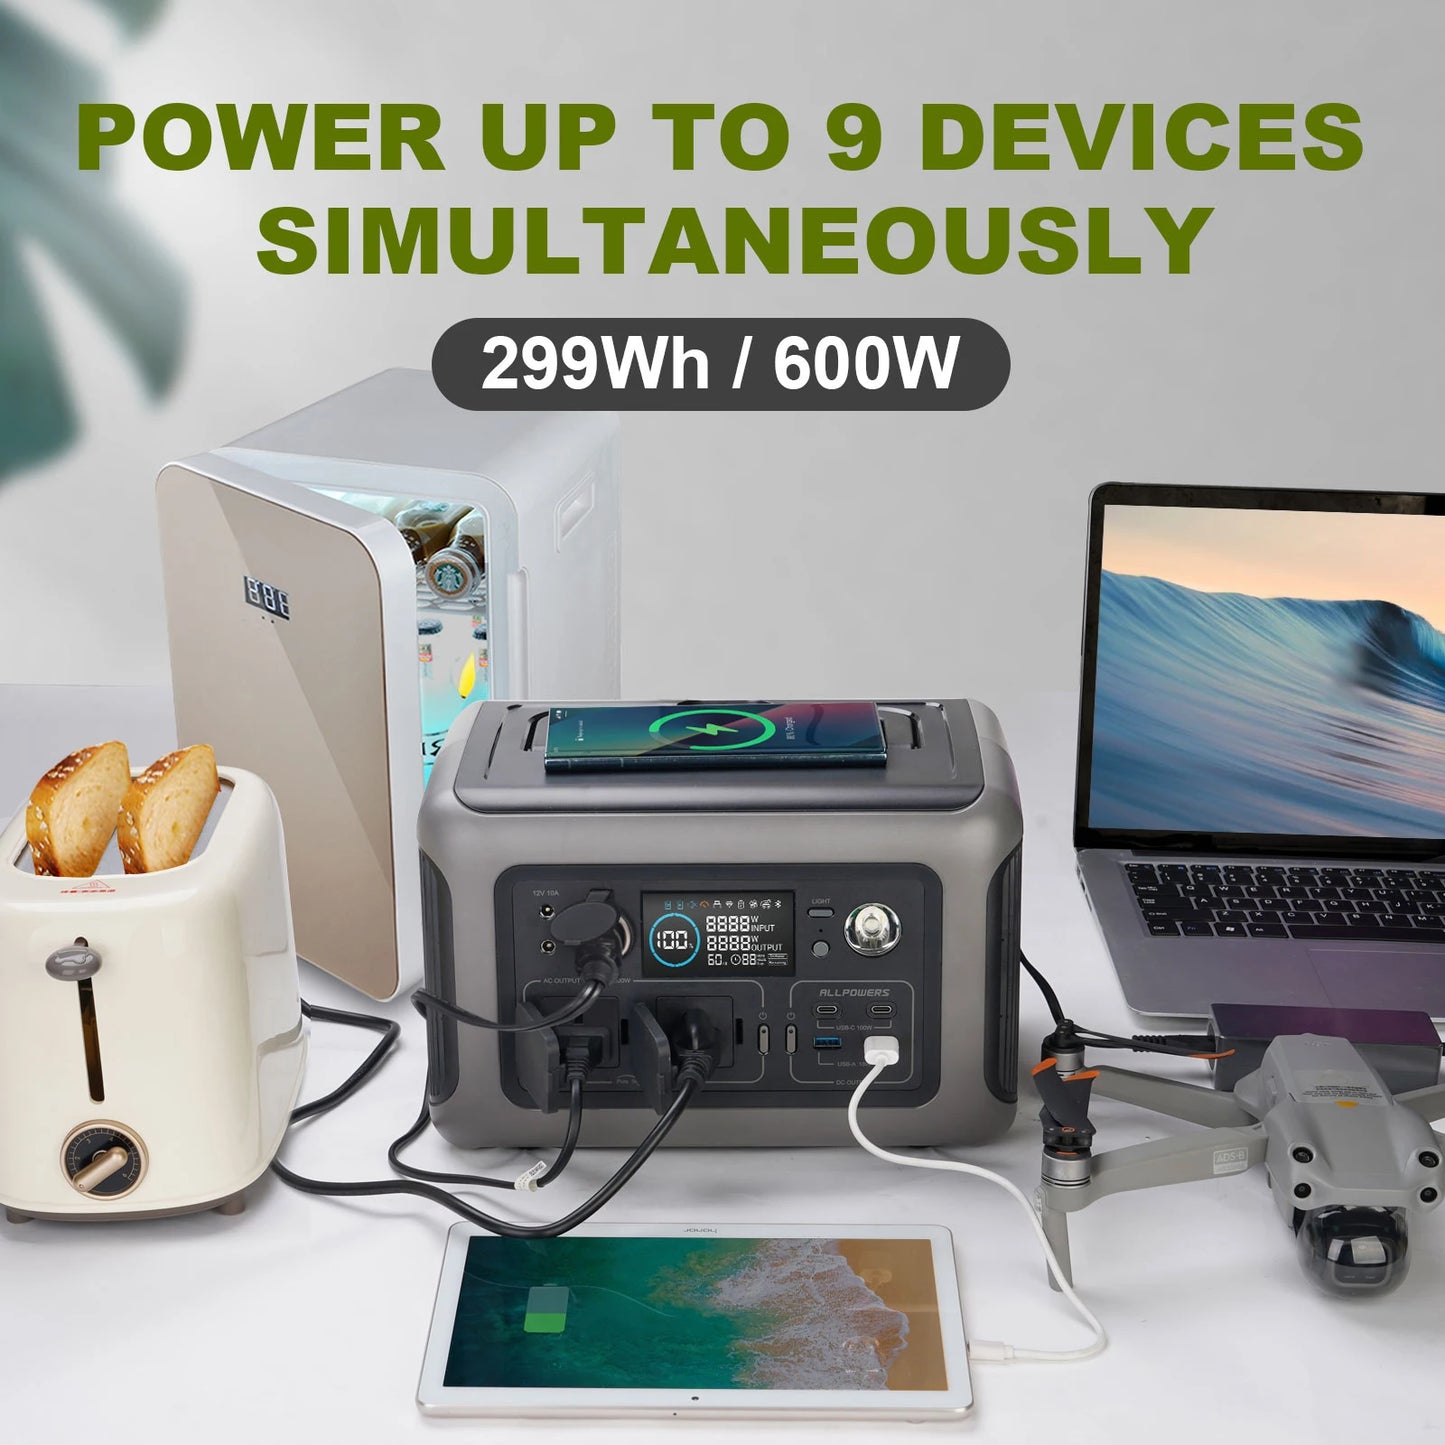 ALLPOWERS Portable Power Station R600, 299Wh LiFeP04 Battery with 2x 600W (1200W Surge)